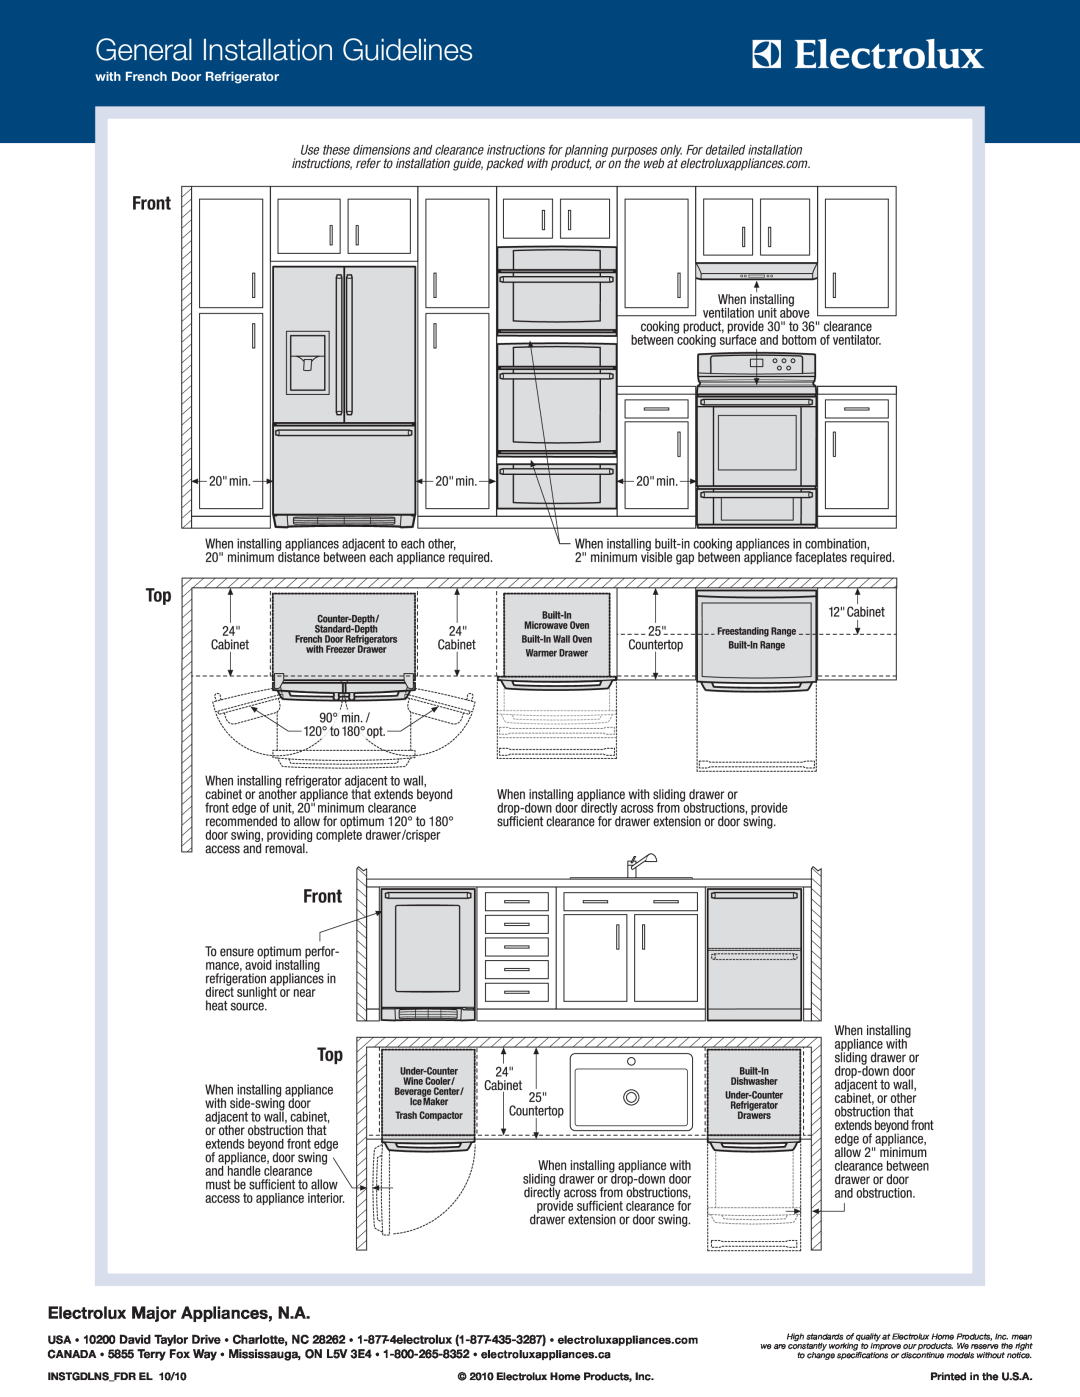 Electrolux EW30EW55G W, EW30EW55G S, EW30EW55G B General Installation Guidelines, Electrolux Major Appliances, N.A, Front 